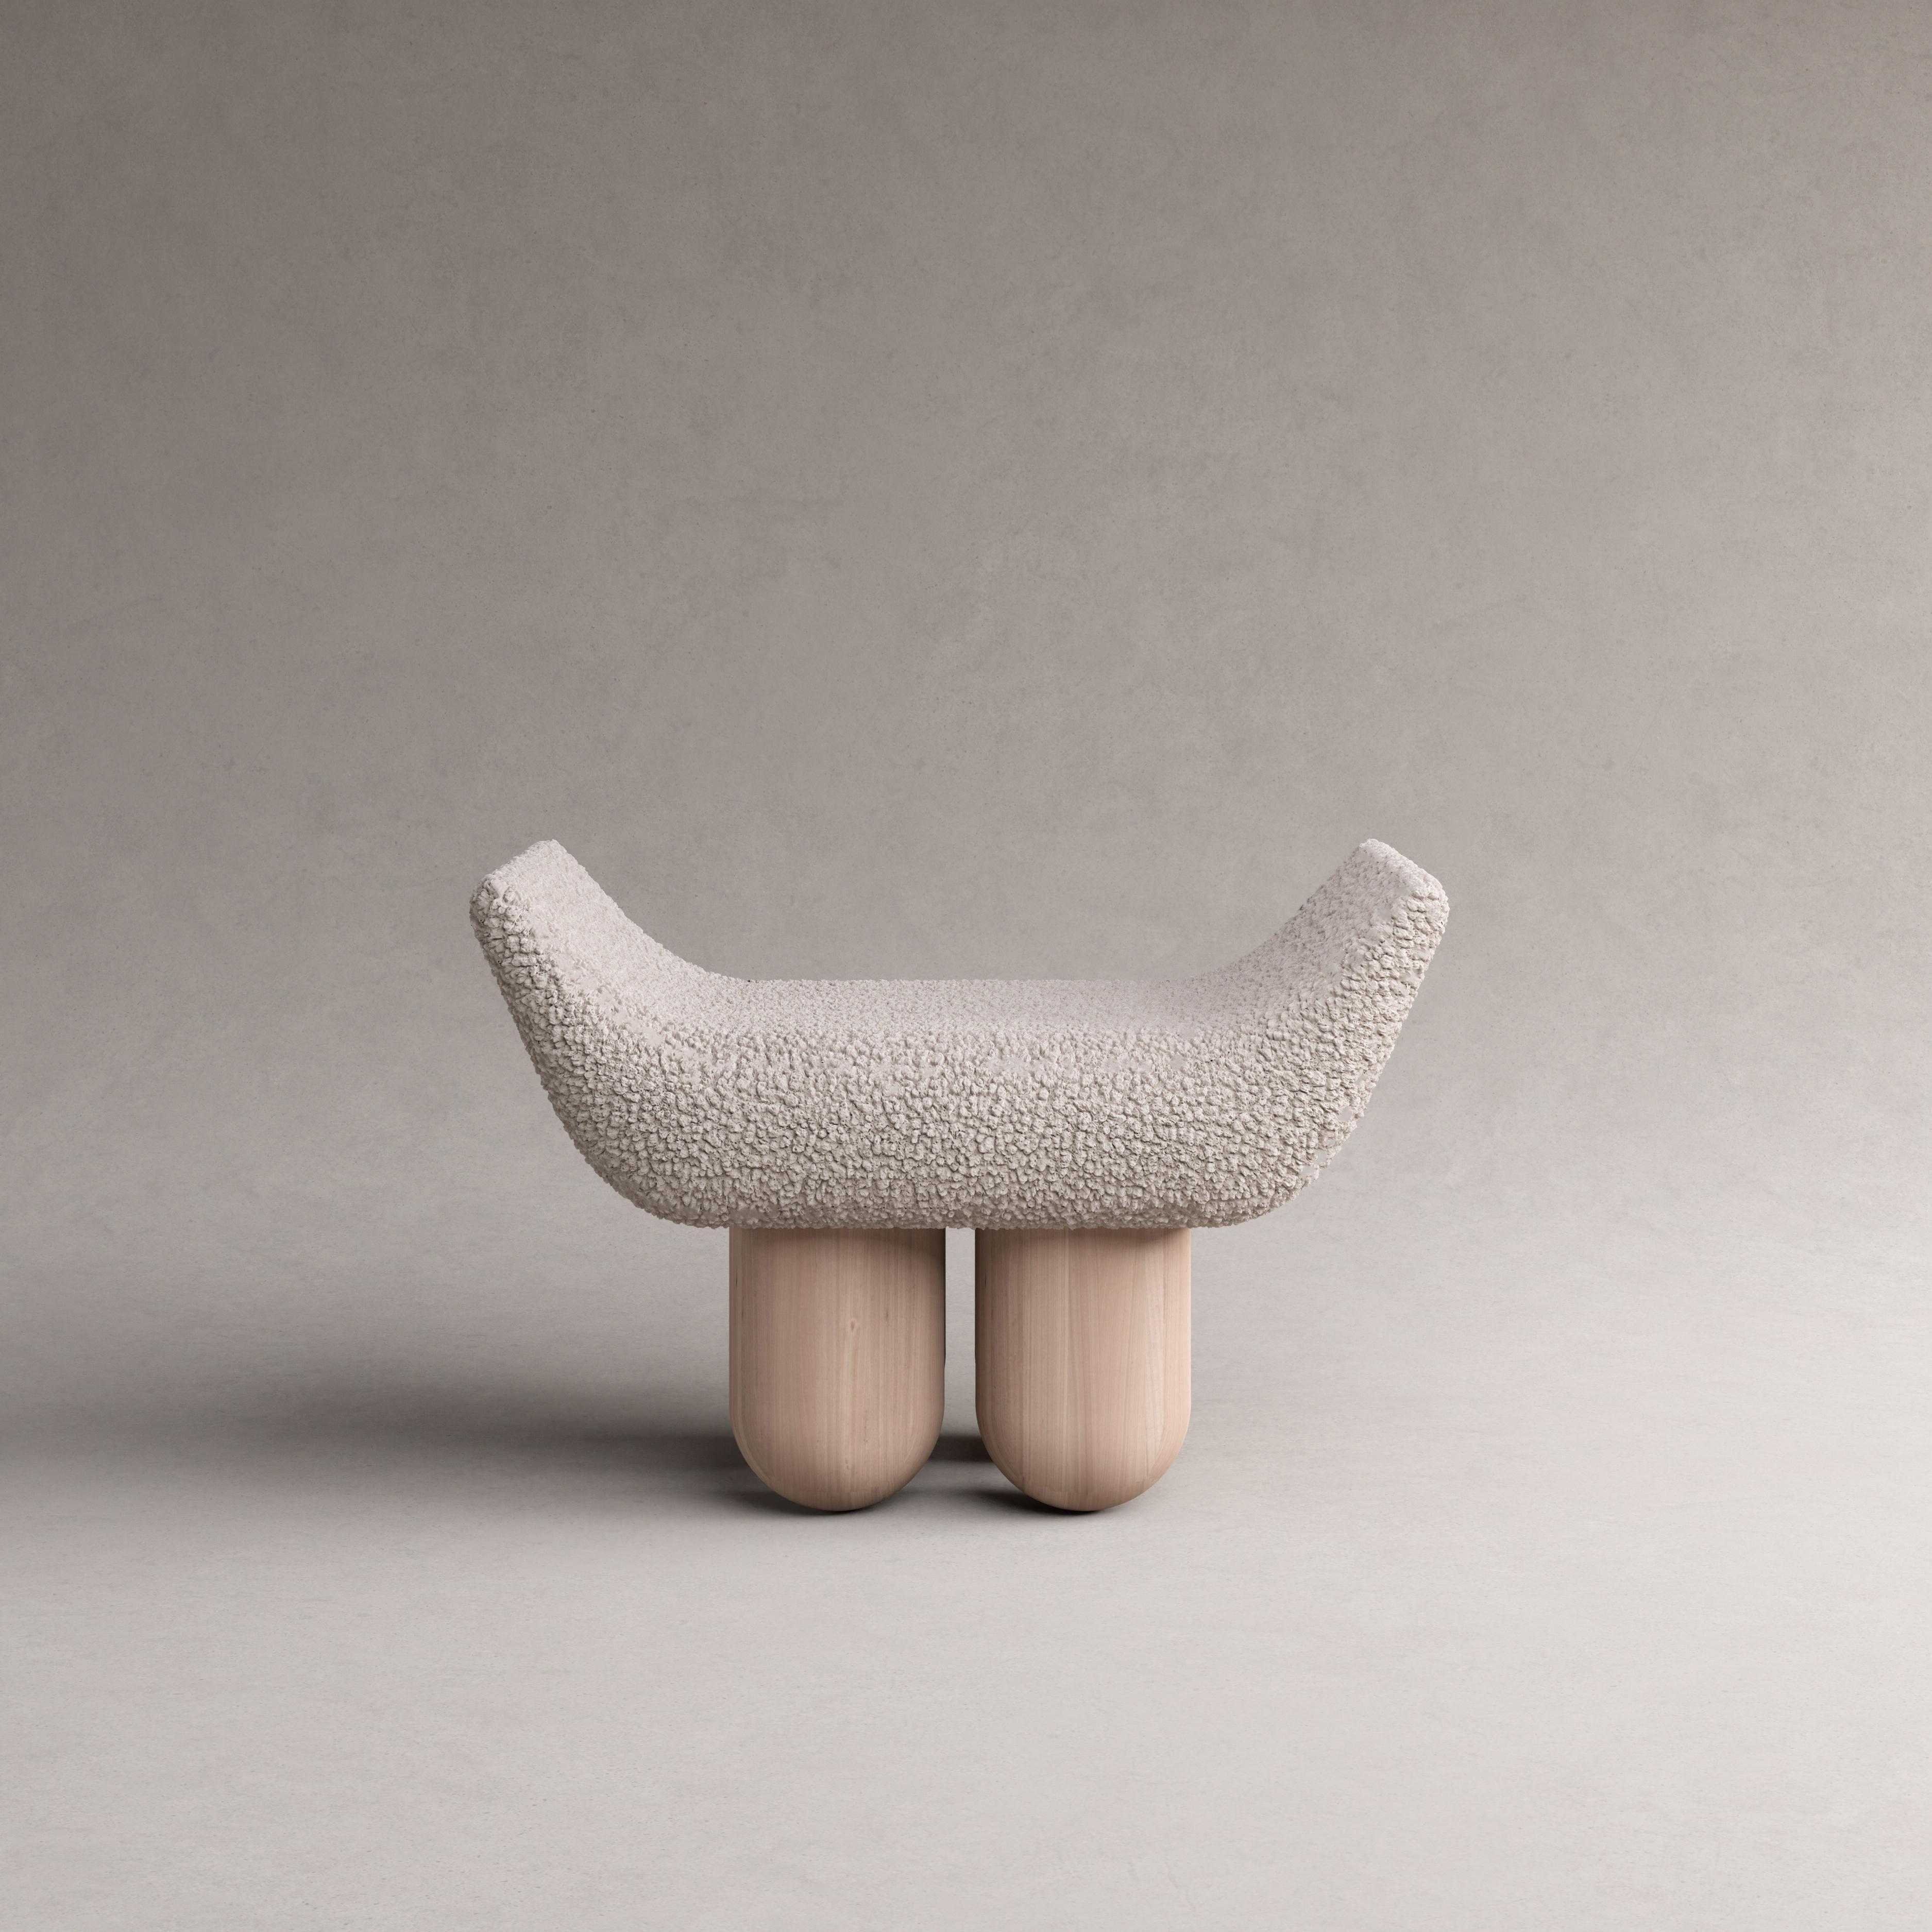 Taurus by Pietro Franceschini
Sold exclusively by Galerie Philia
Manufacturer: Stefano Minotti
Dimensions: W 76 x L 52 x H 54 cm
Materials: Lamb and ashwood.
Available in Bouclé.

Pietro Franceschini is an architect and designer based in New